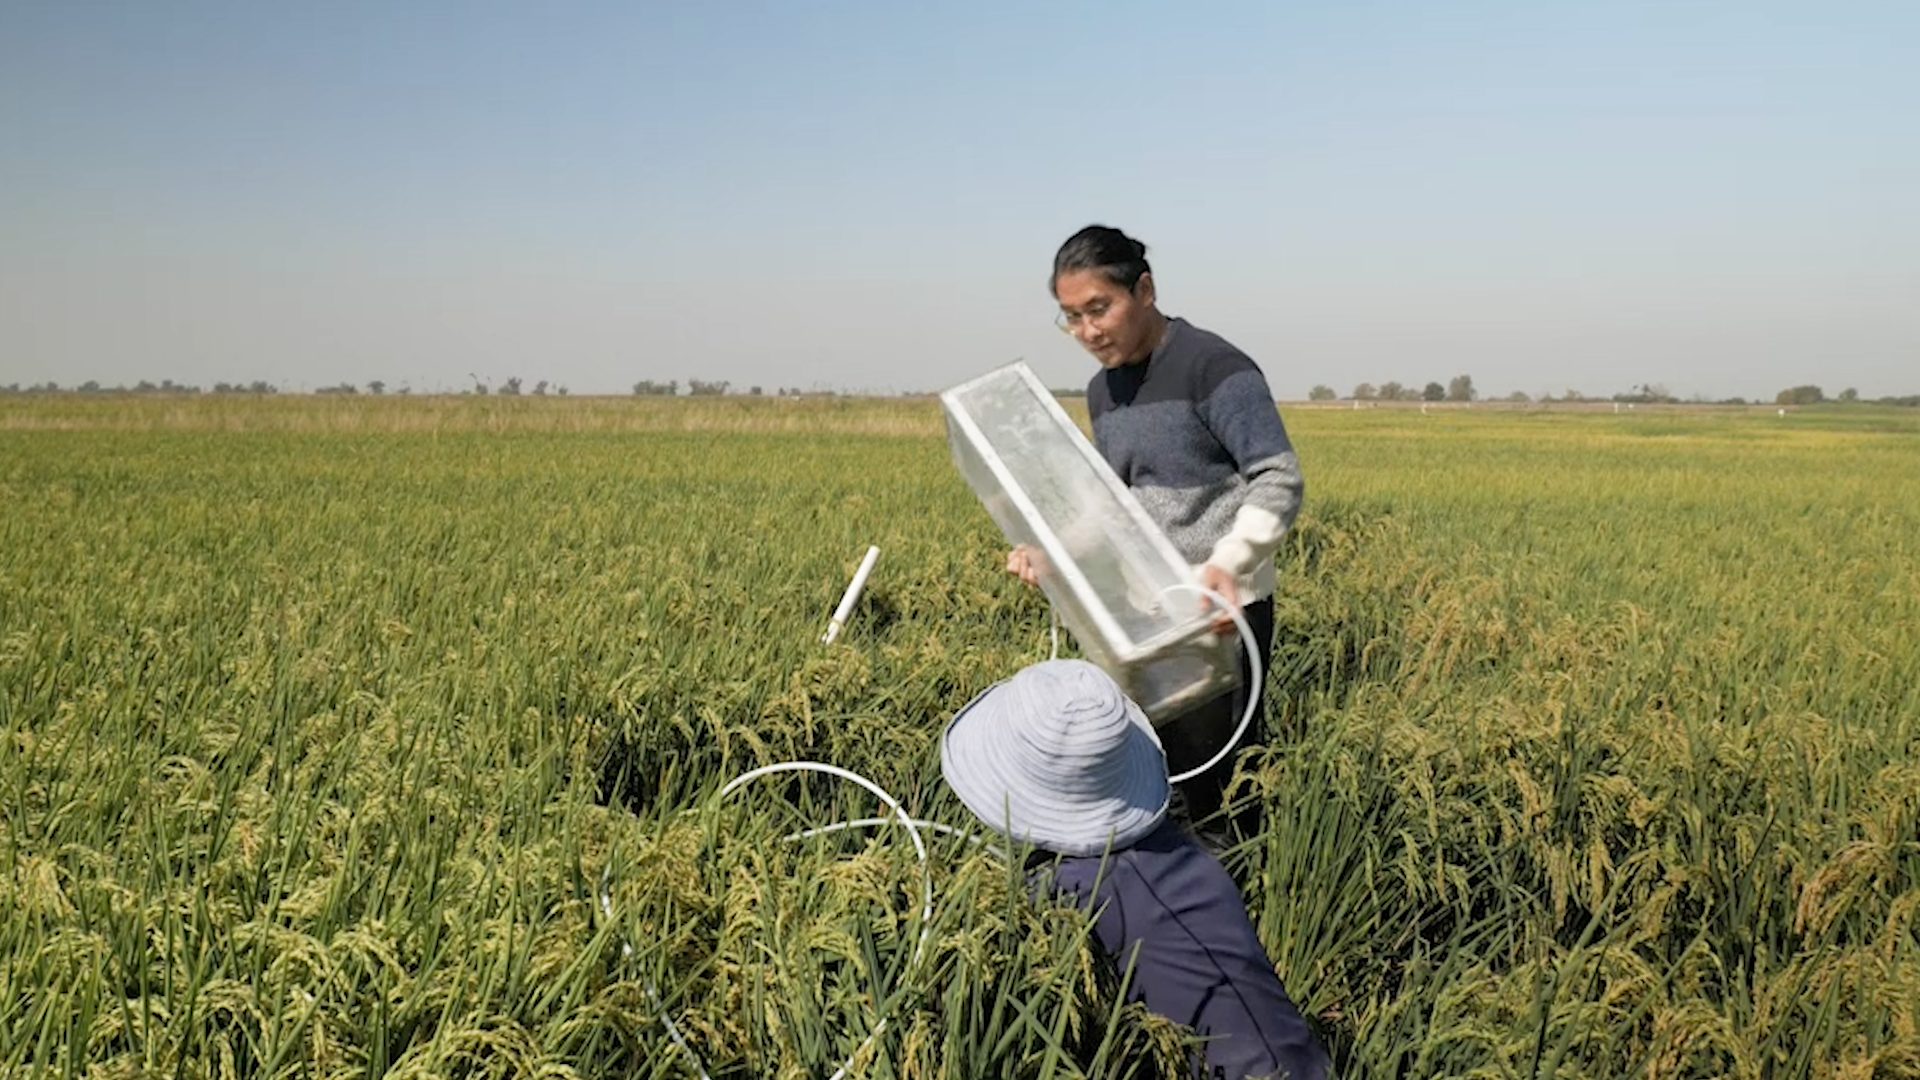 Jack Kim and Jill Banfield in the rice field with a Picarro gas chamber to measure methane emissions